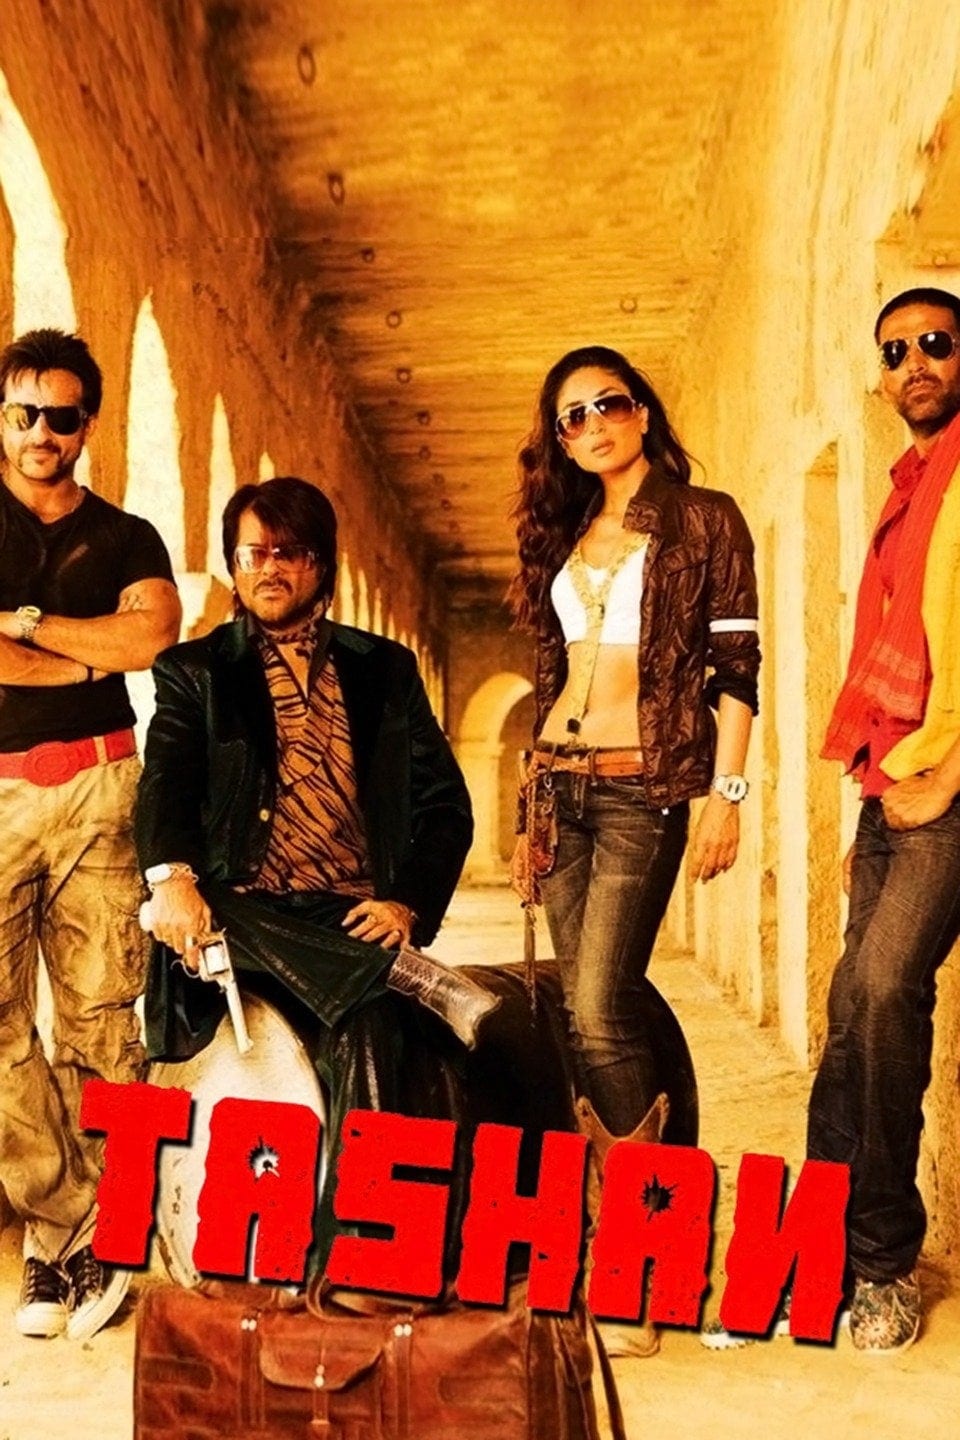 Poster for the movie "Tashan"